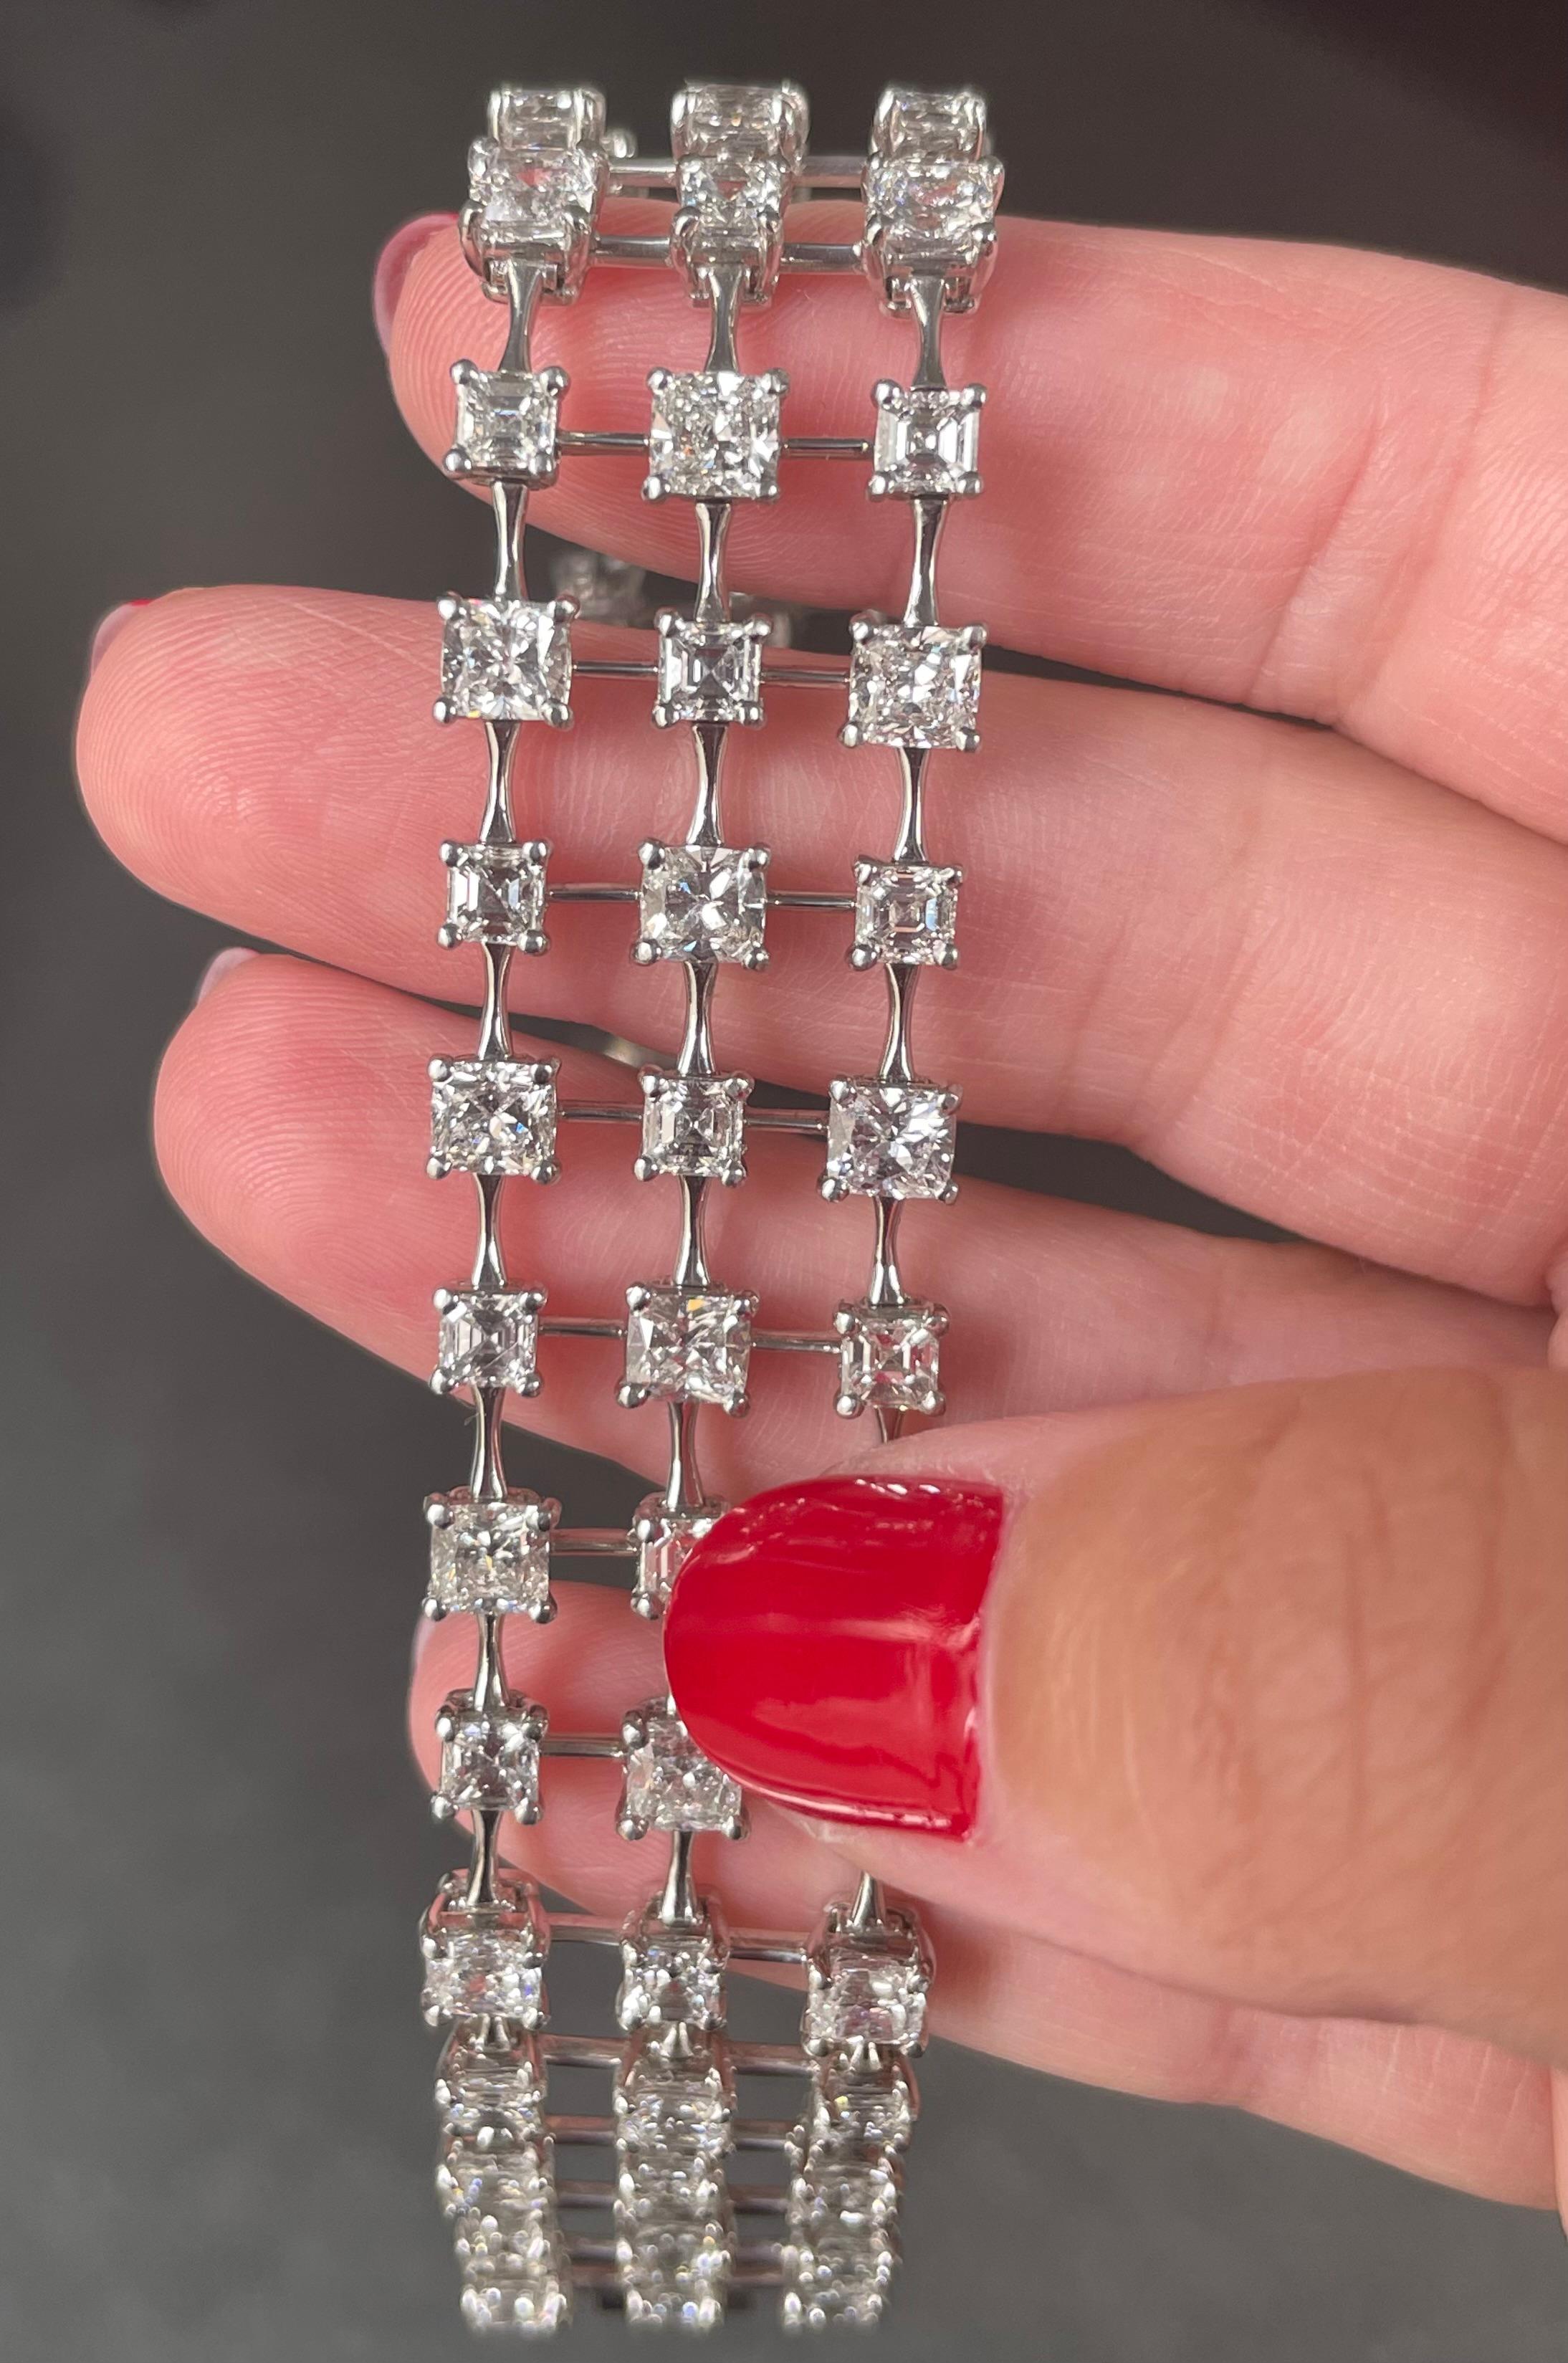 Sleek and sexy,  this three row diamond bracelet is a sophisticated addition to any jewelry collection. The delicate bars of platinum and negative space are the perfect background to emphasize the diamonds. The bracelet contains 31 cushion cut